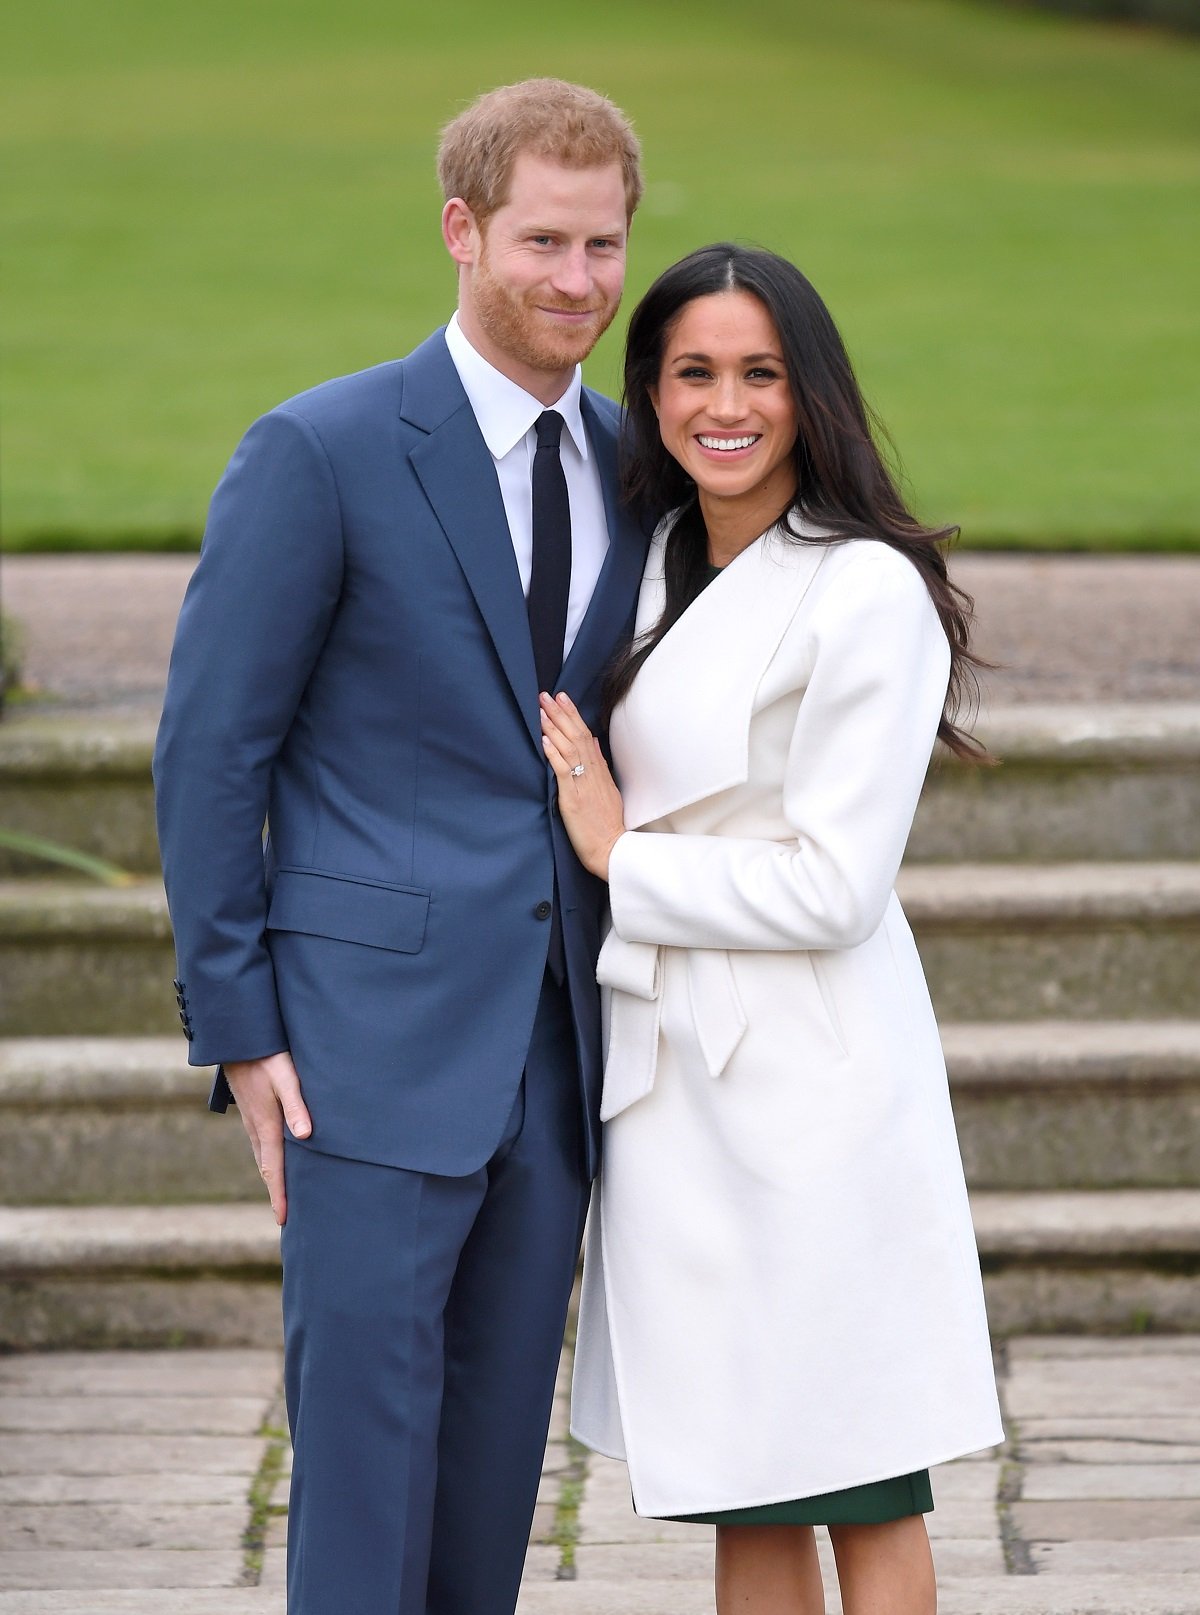 Prince Harry and Meghan Markle attend an official photocall to announce their engagement at The Sunken Gardens at Kensington Palace on November 27, 2017 in London, England. 